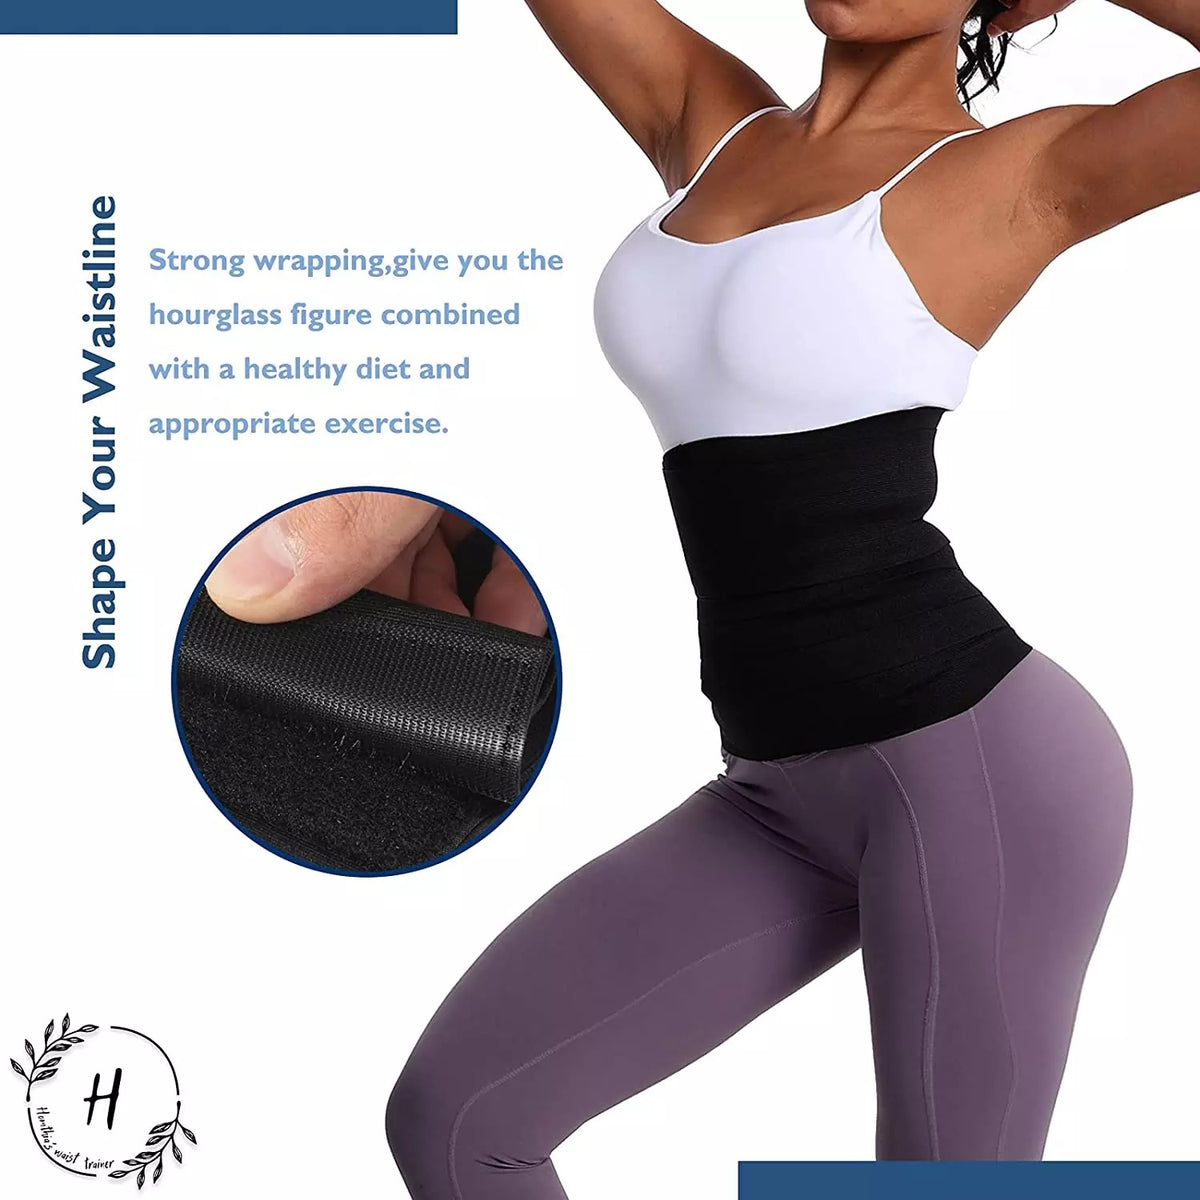 This 10 day invisible waist trainer tape is a must have. This tape